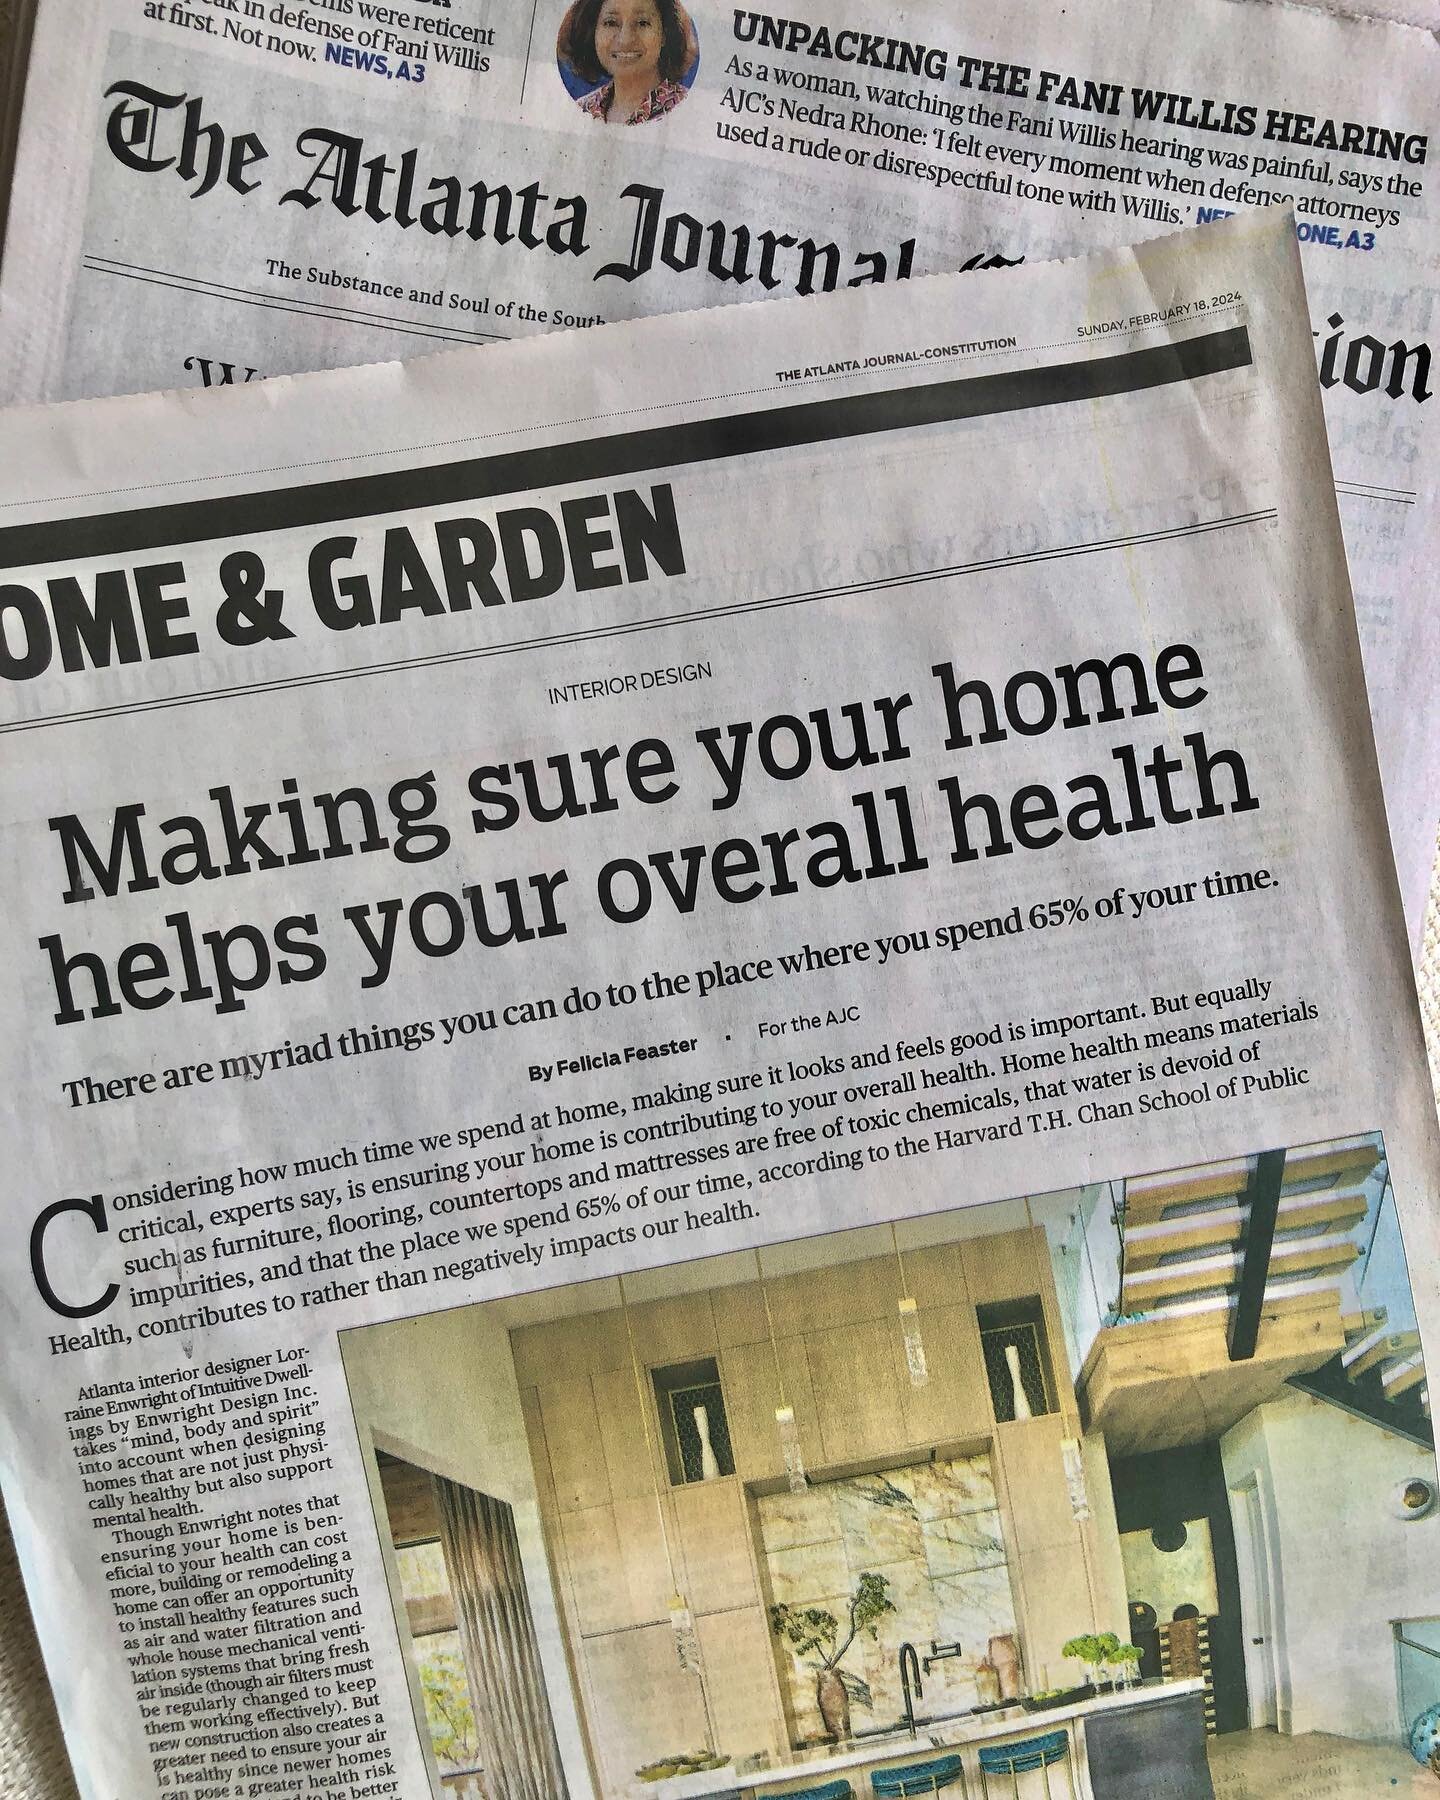 &hellip;simply WOW!&hellip; 
So honored to be featured in this full page article @ajcnews, written by @fafeaster for the Atlanta Journal &amp; Constitution Sunday Edition, focusing on creating a healthier home.  We talked about reflective materials, 